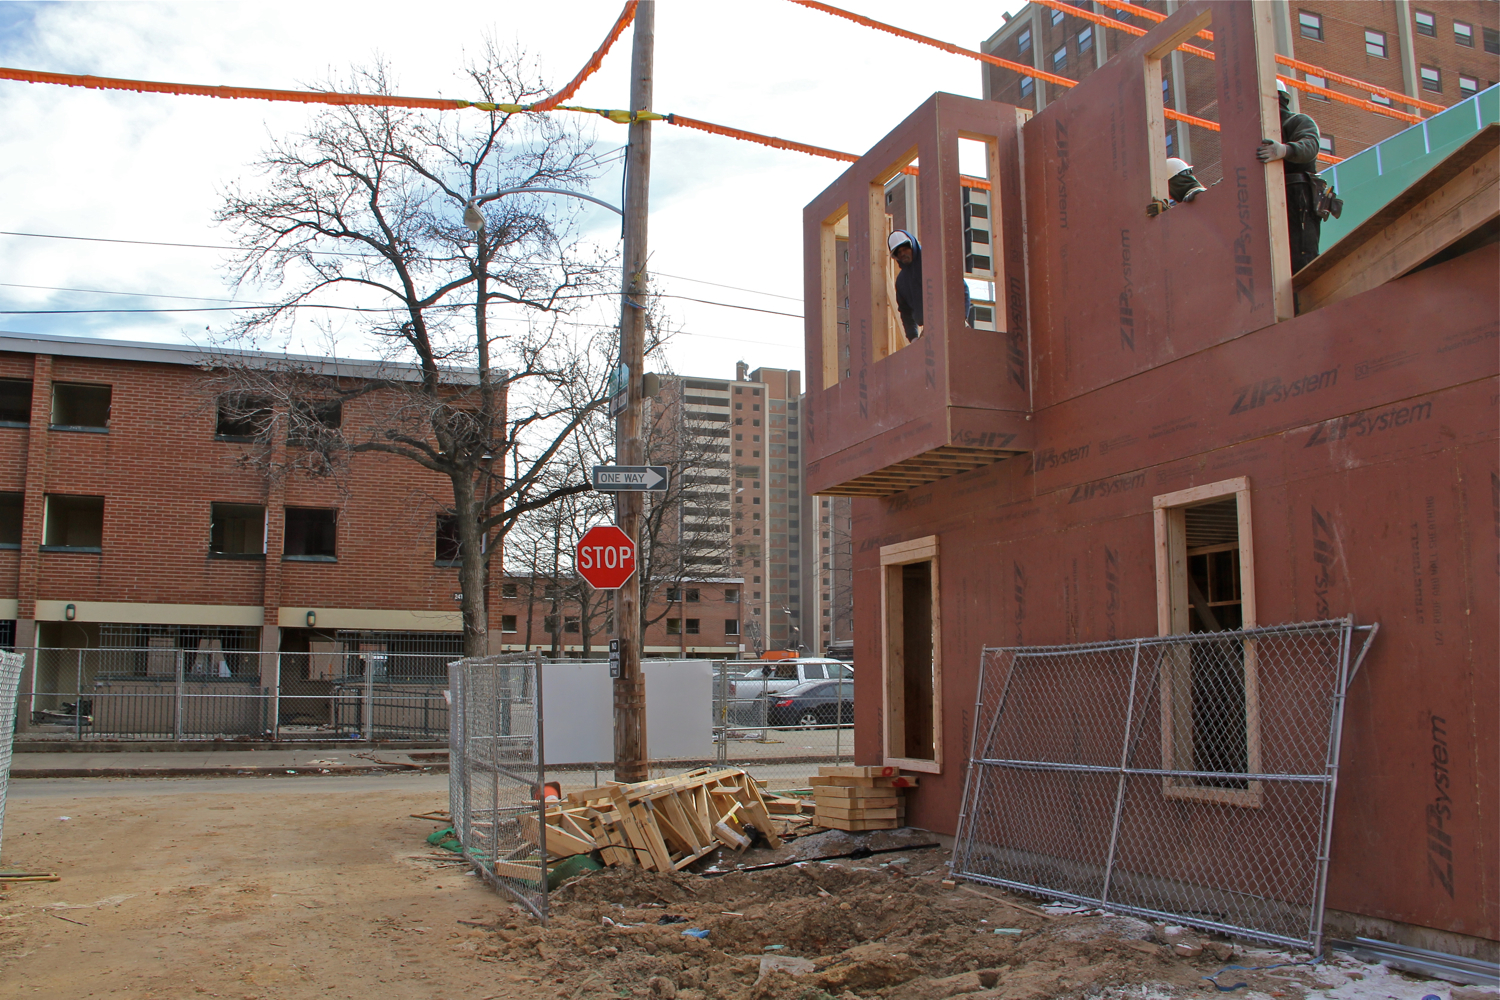 Blumberg low-rises and new construction in progress. February, 2016 | Emma Lee/WHYY